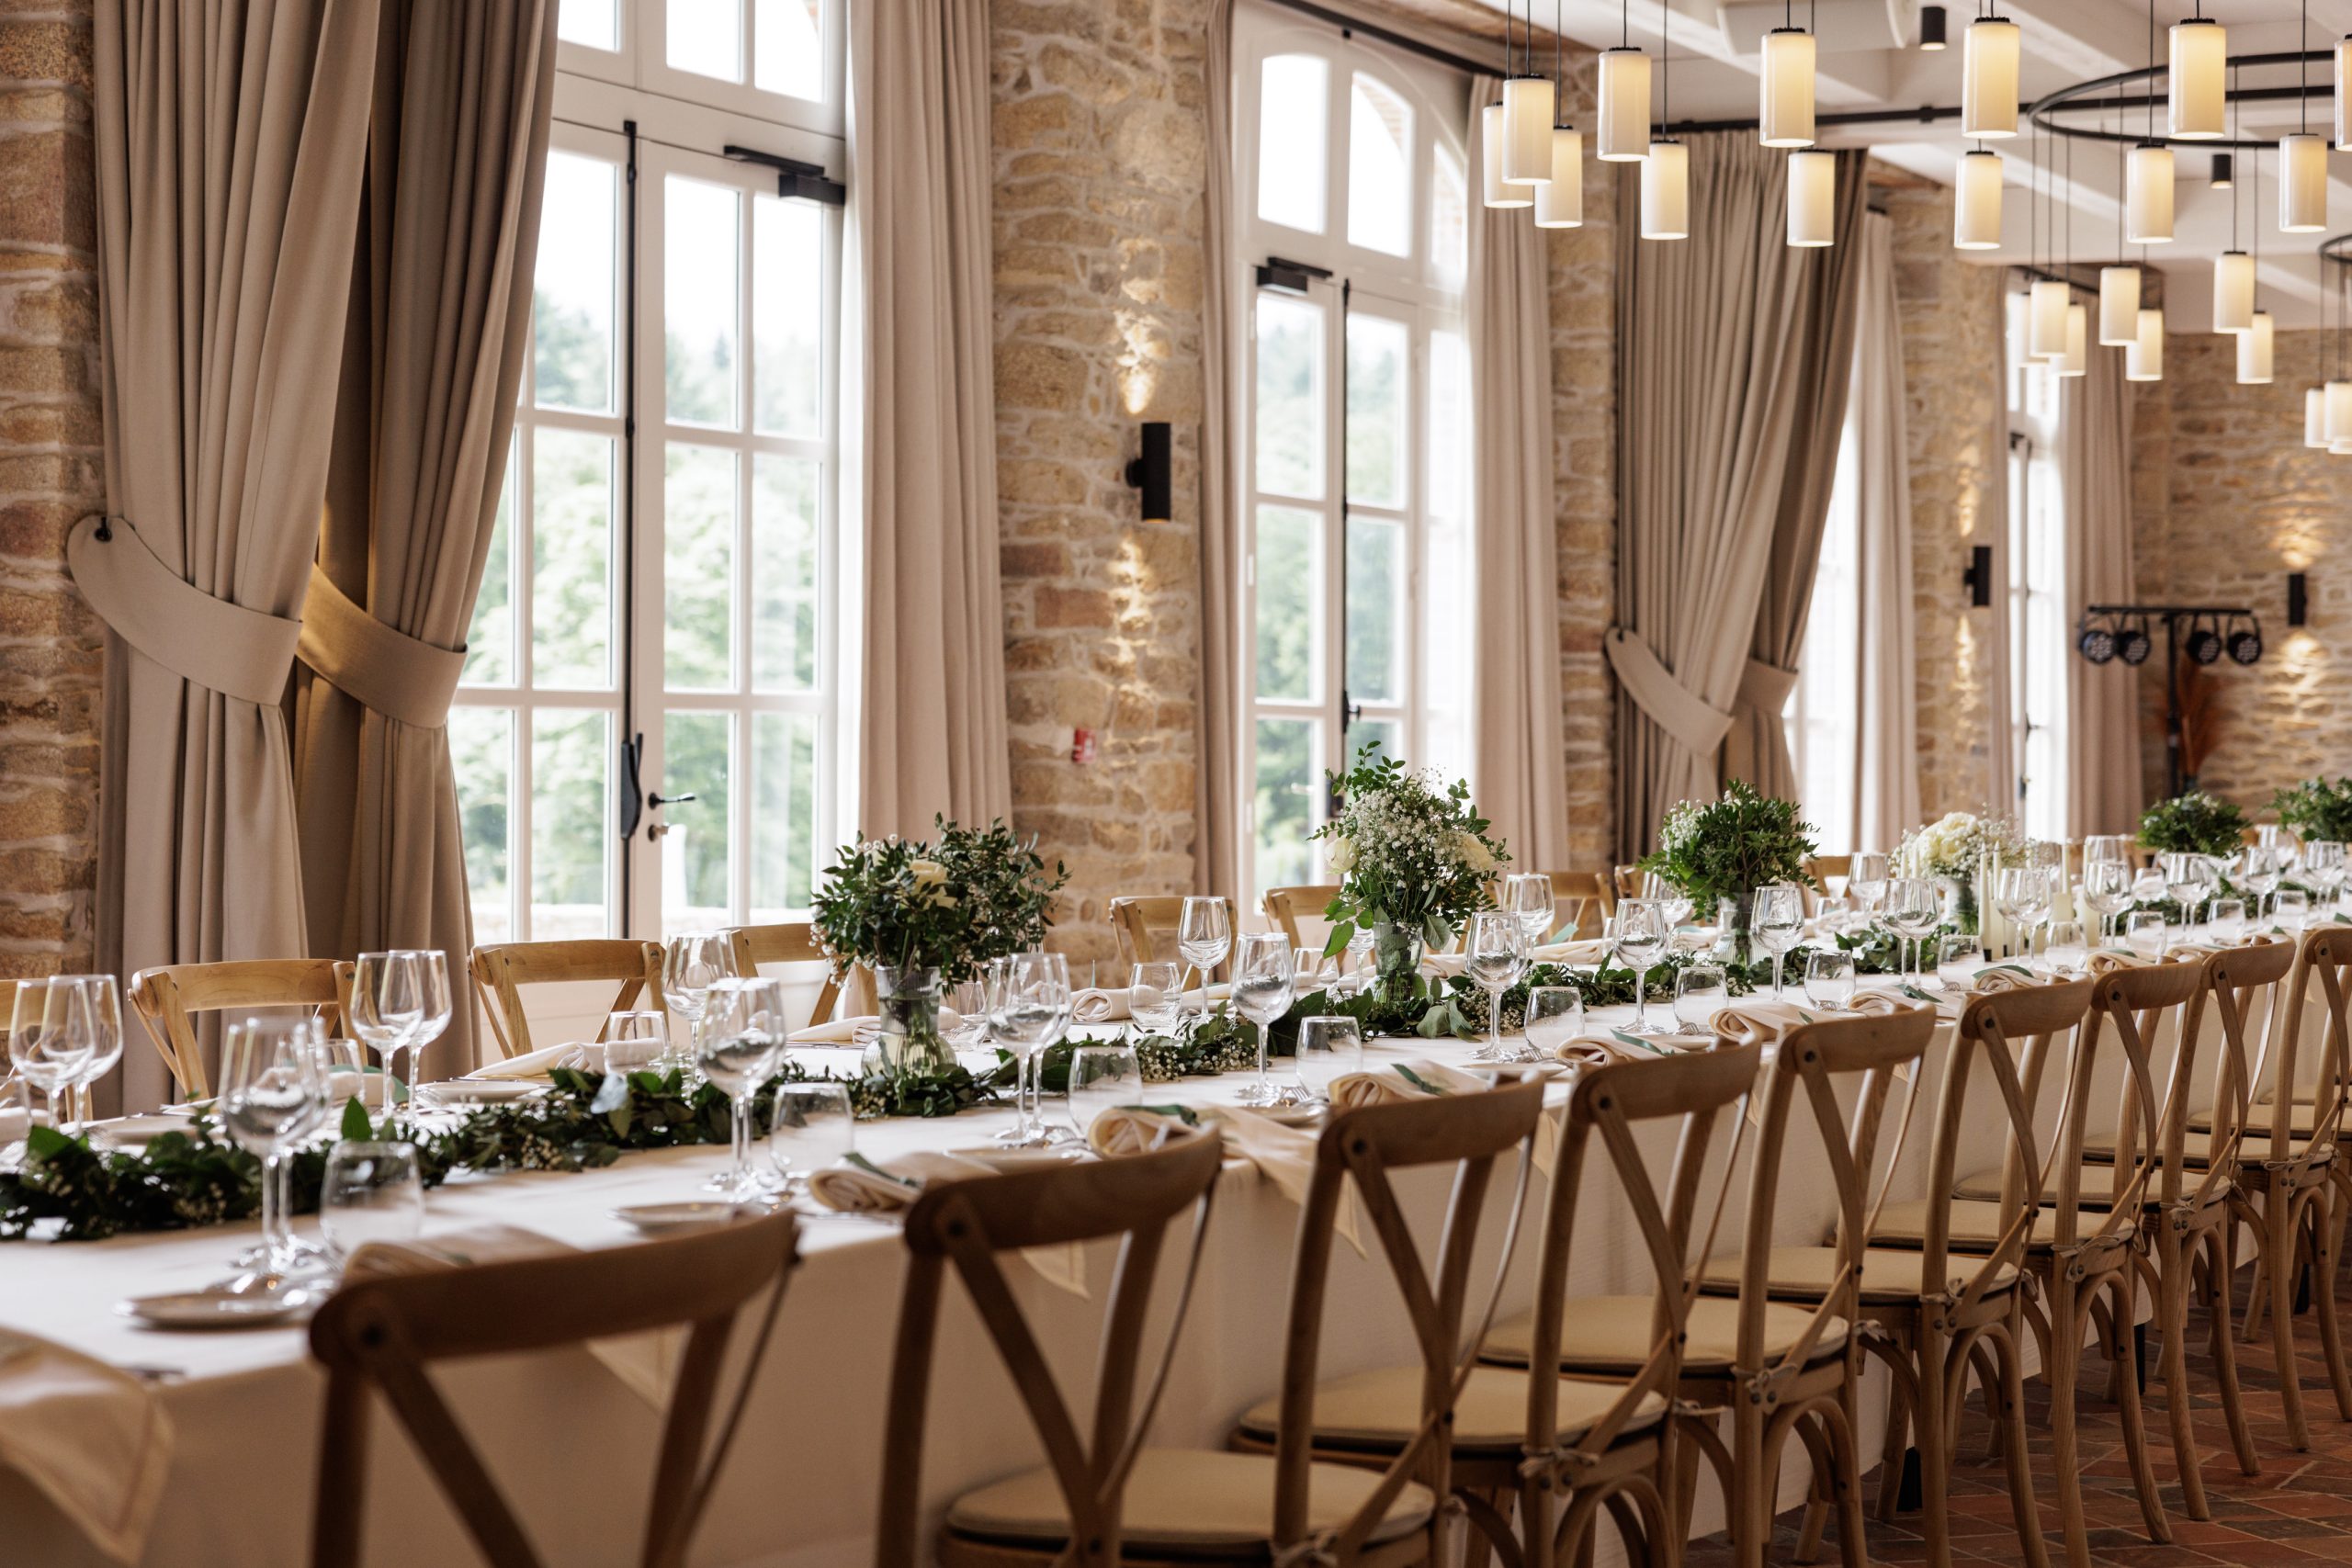 Private wedding reception room by the sea at the Domaine de Locguénolé 4-star hotel in Brittany, Morbihan department